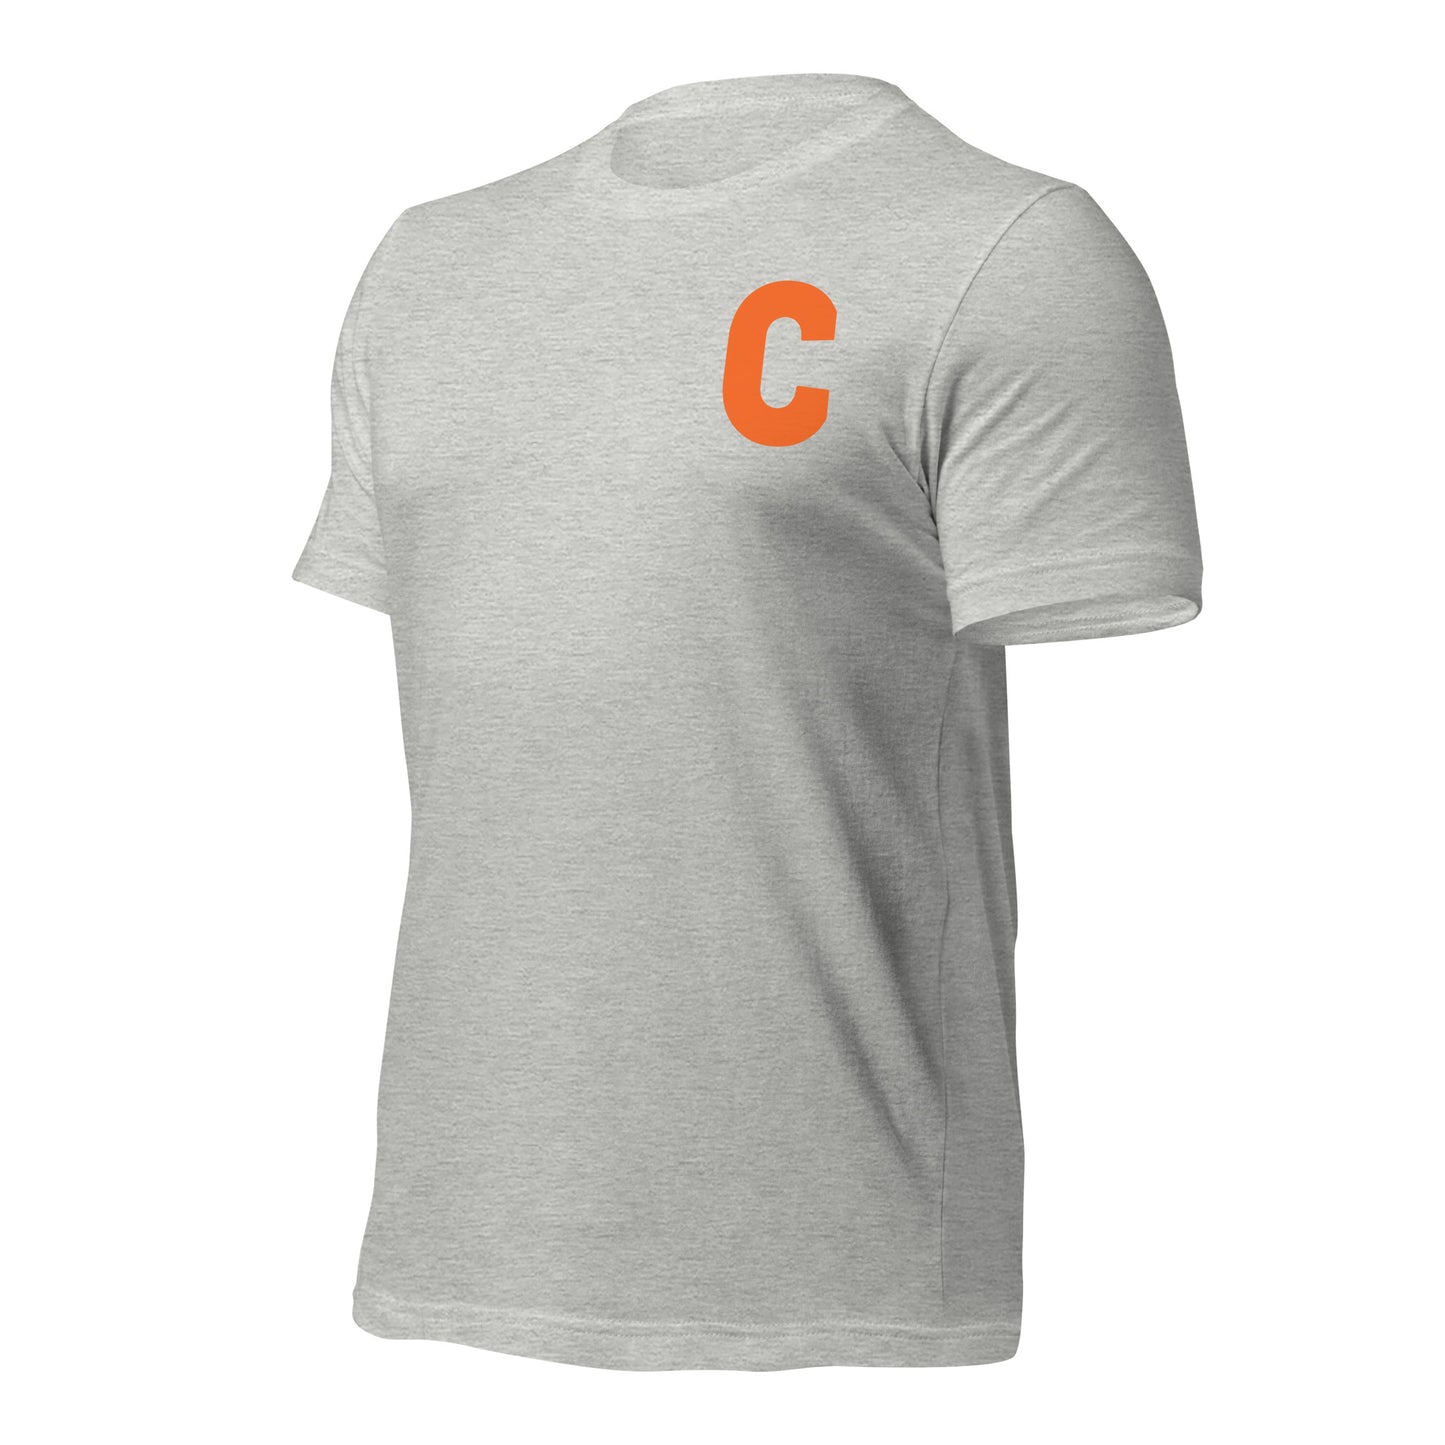 A Day at Shea "C" Adult Unisex T-Shirt